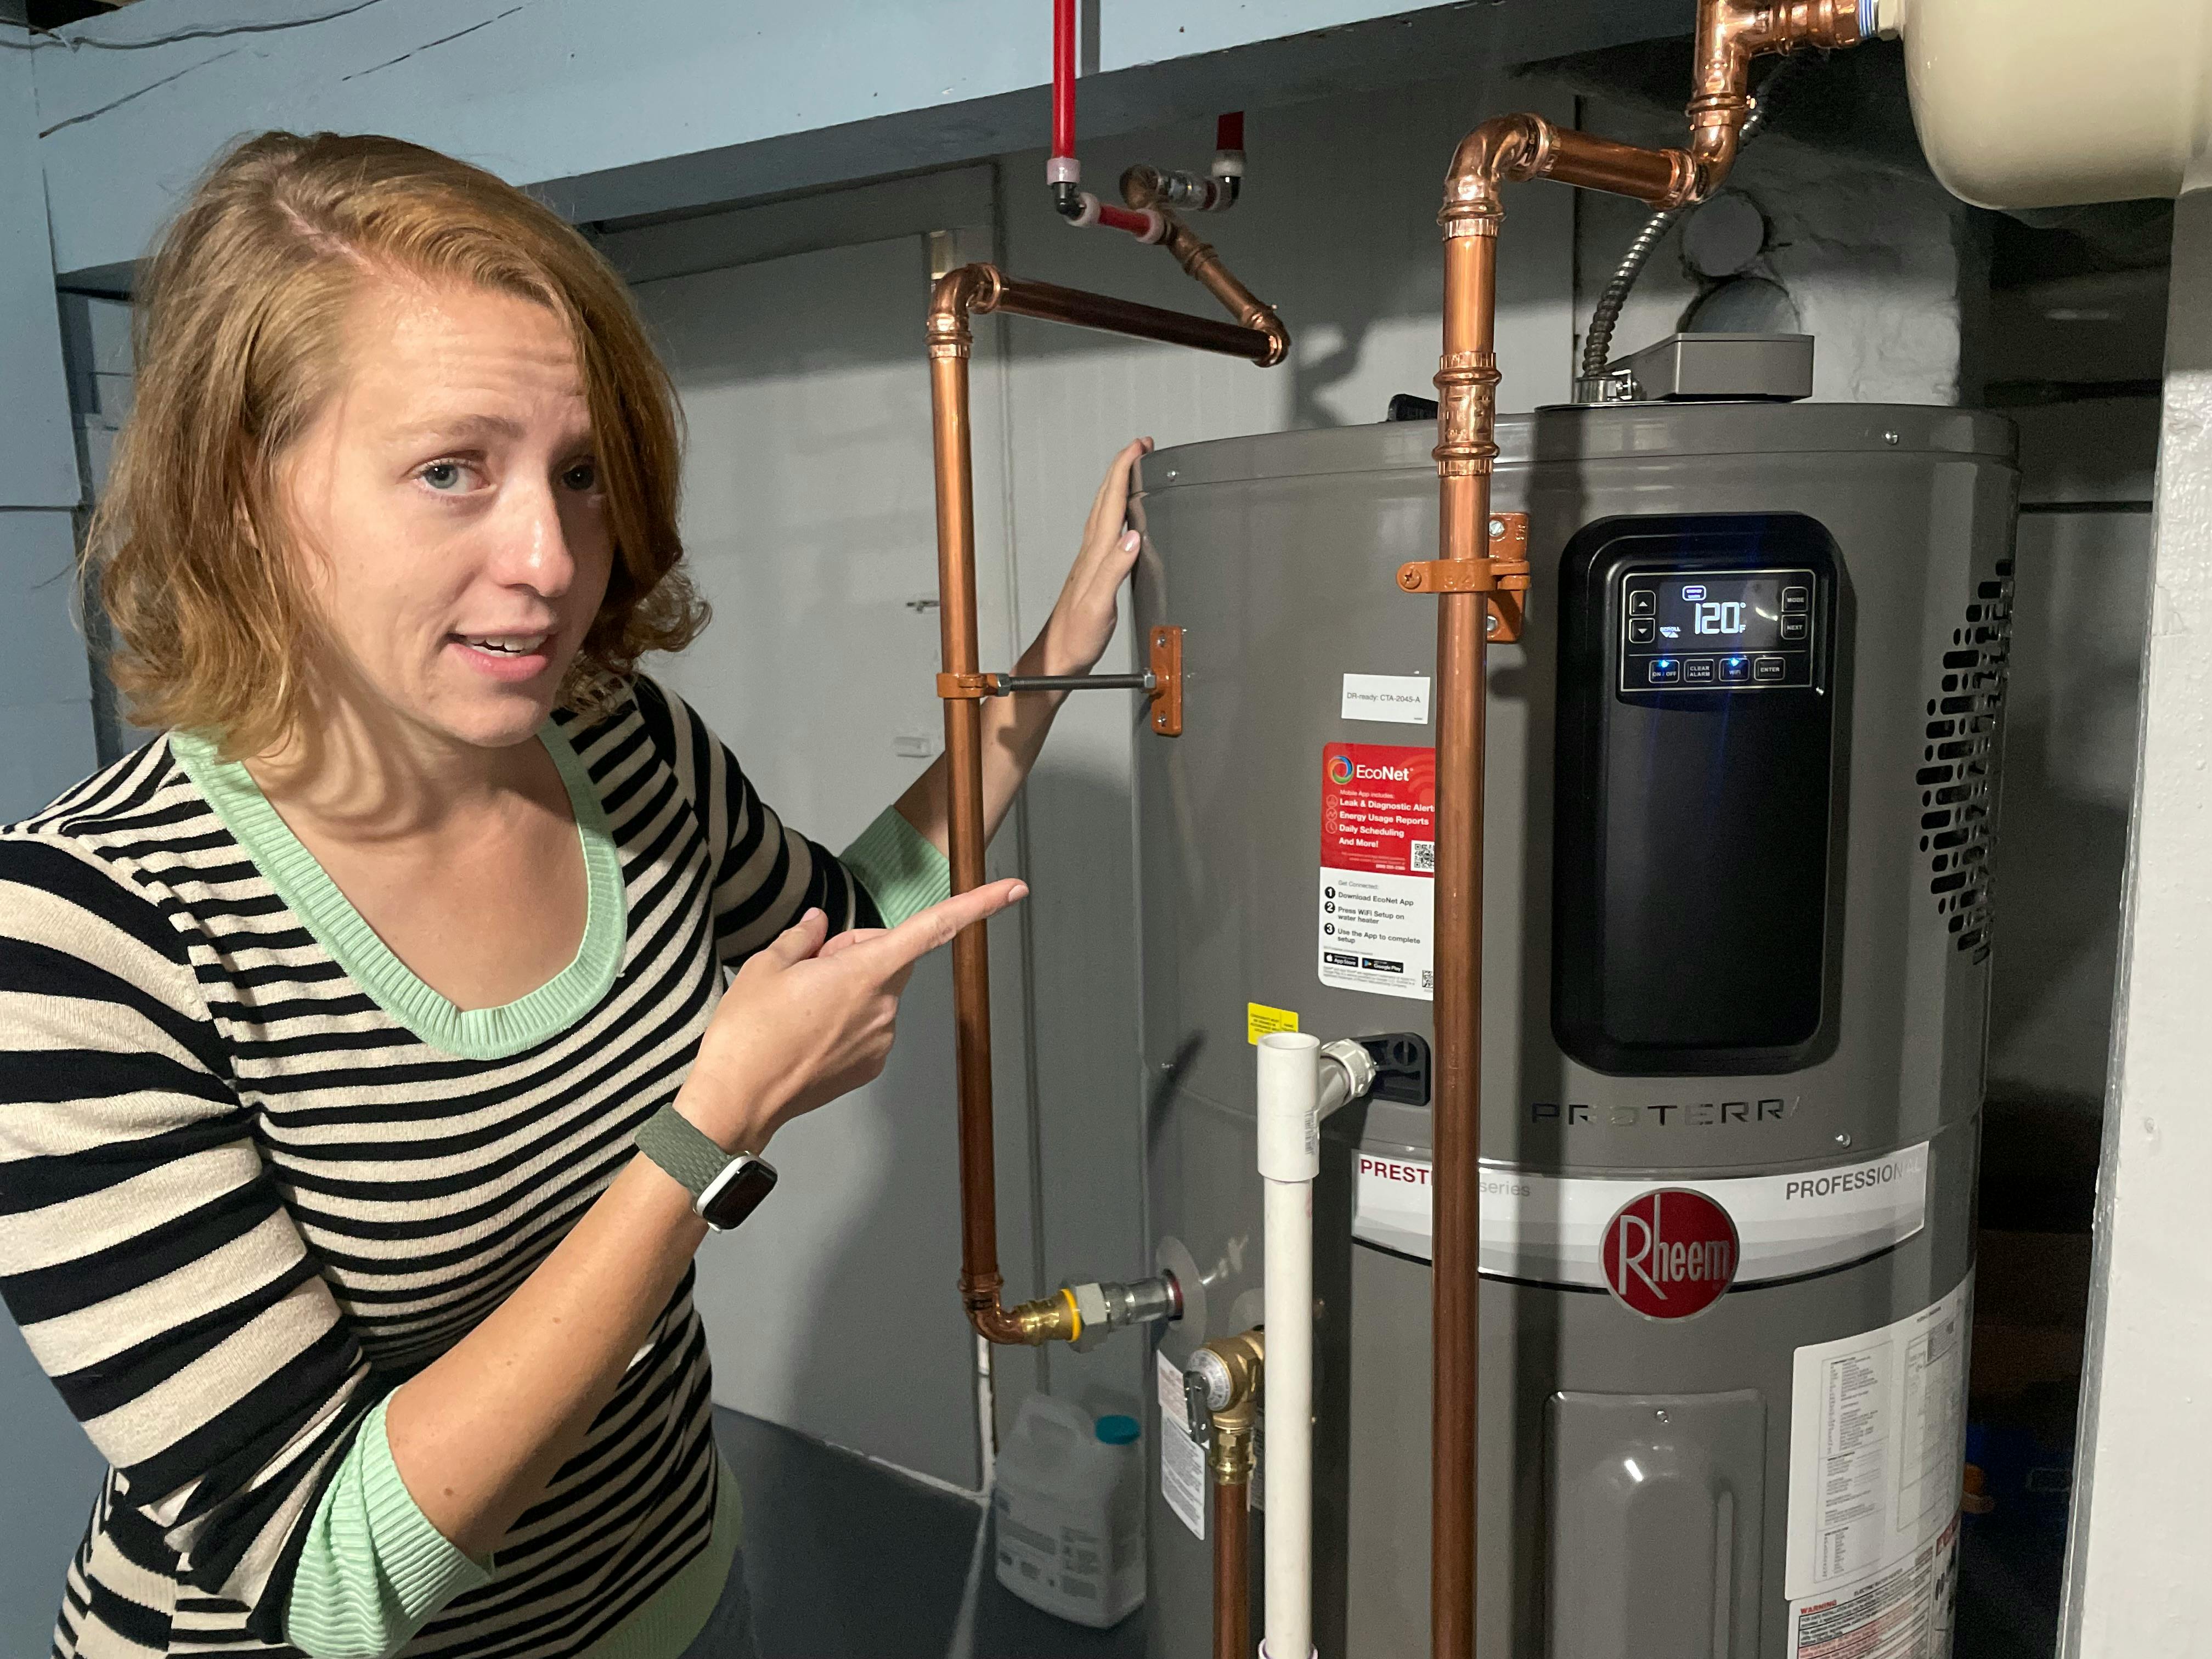 Heat pumps can replace traditional hot water heaters